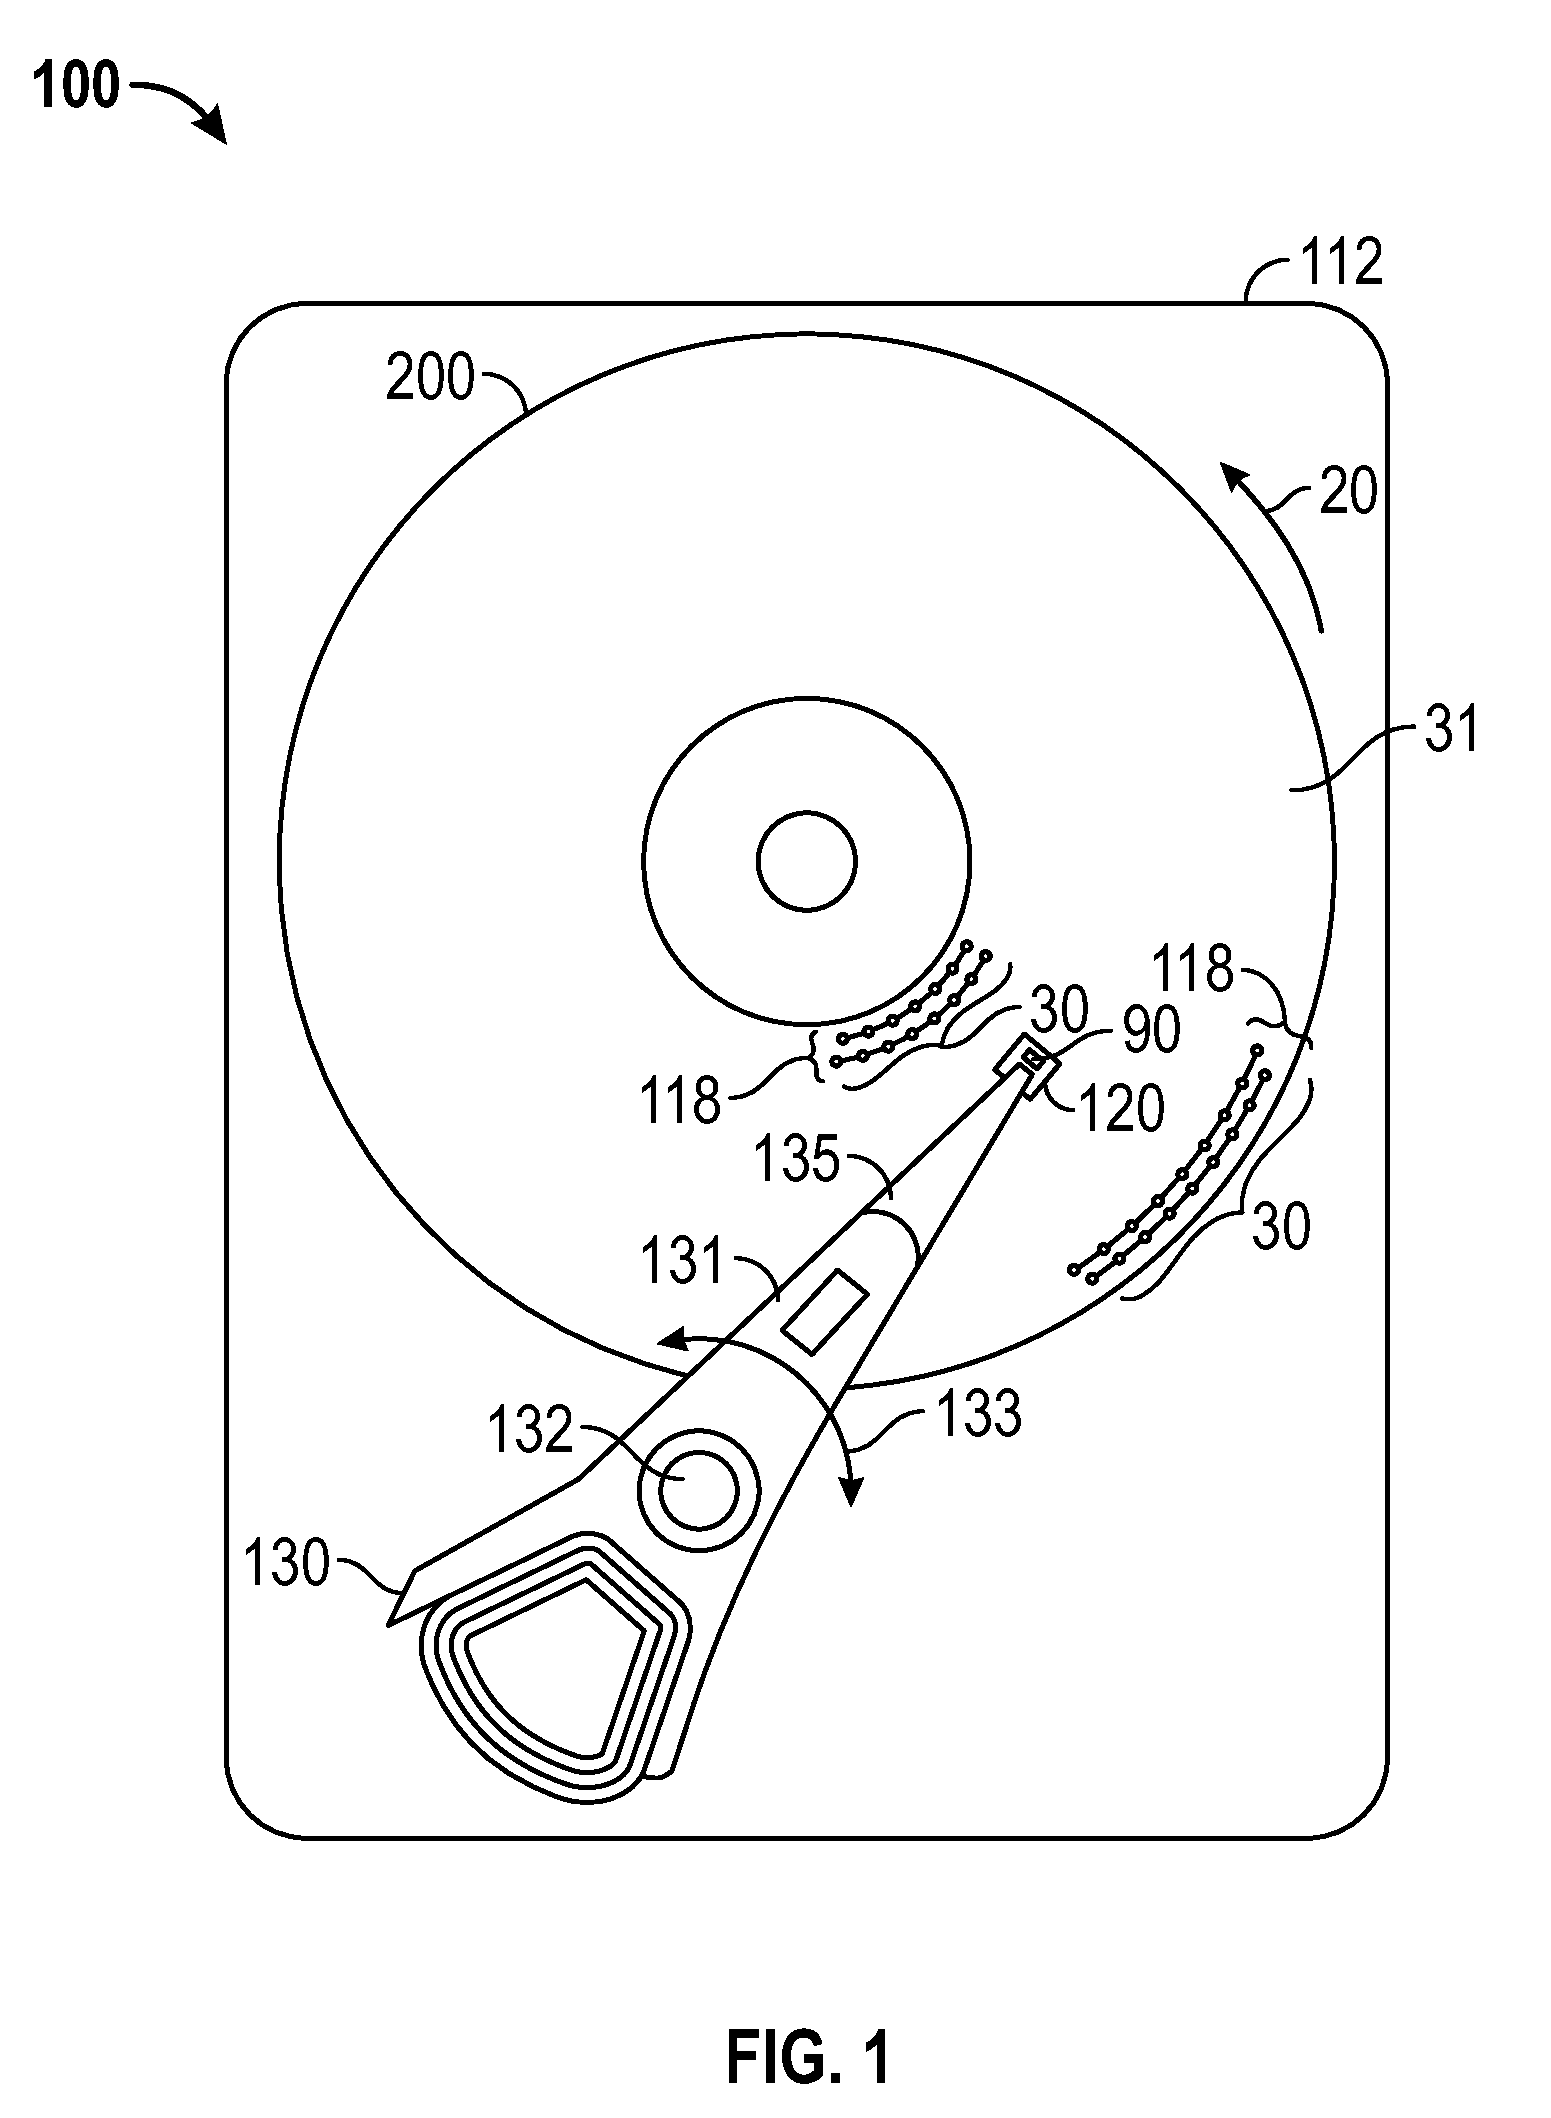 Thermally-assisted recording (TAR) head with conductive layer between the near-field transducer and the write pole